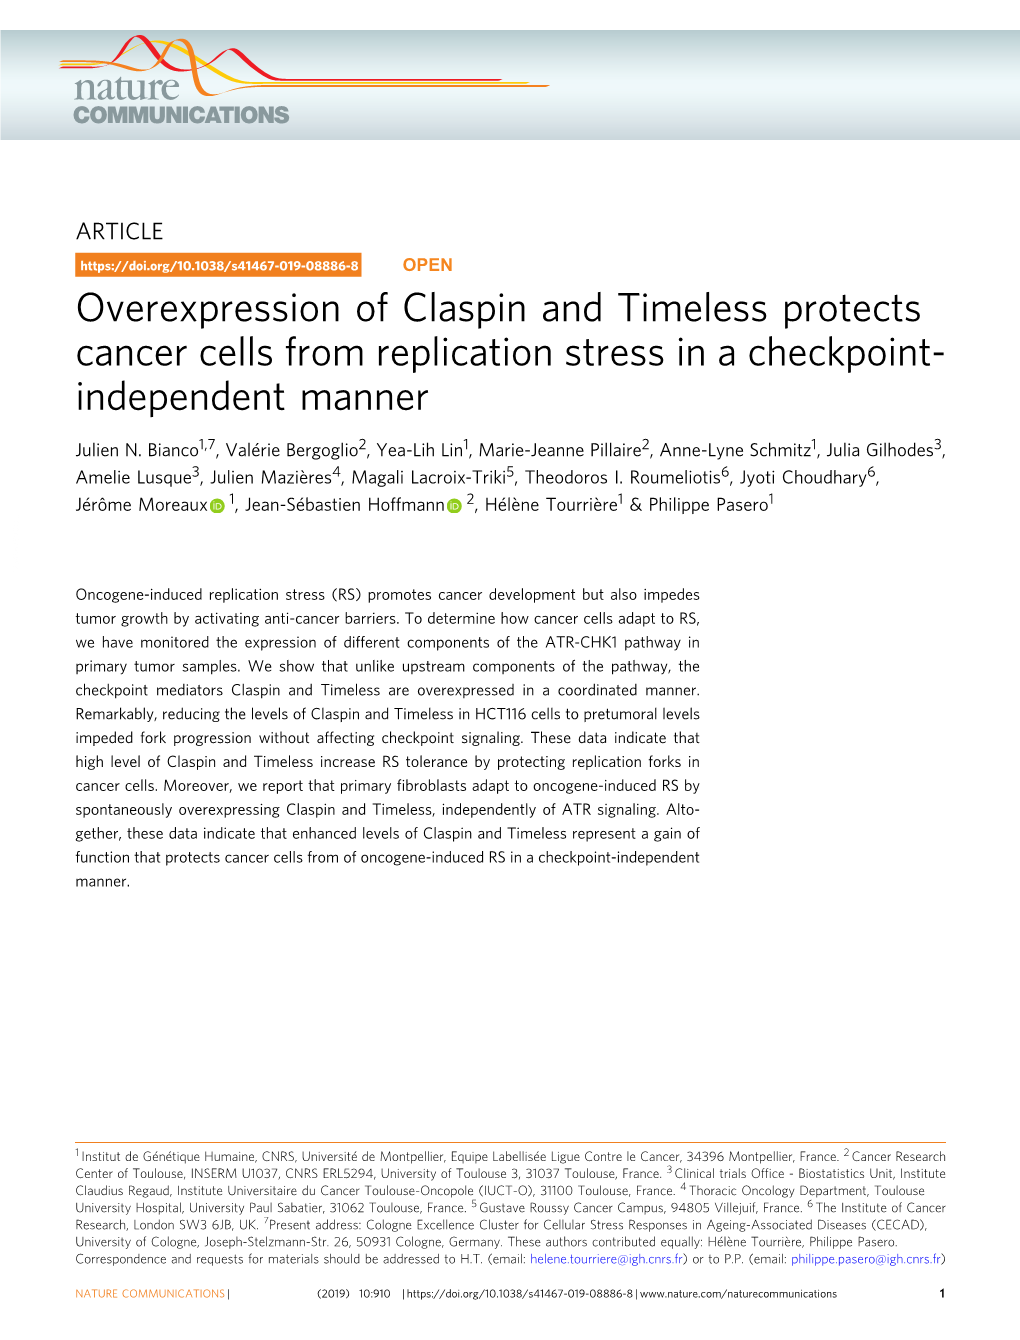 Overexpression of Claspin and Timeless Protects Cancer Cells from Replication Stress in a Checkpoint- Independent Manner